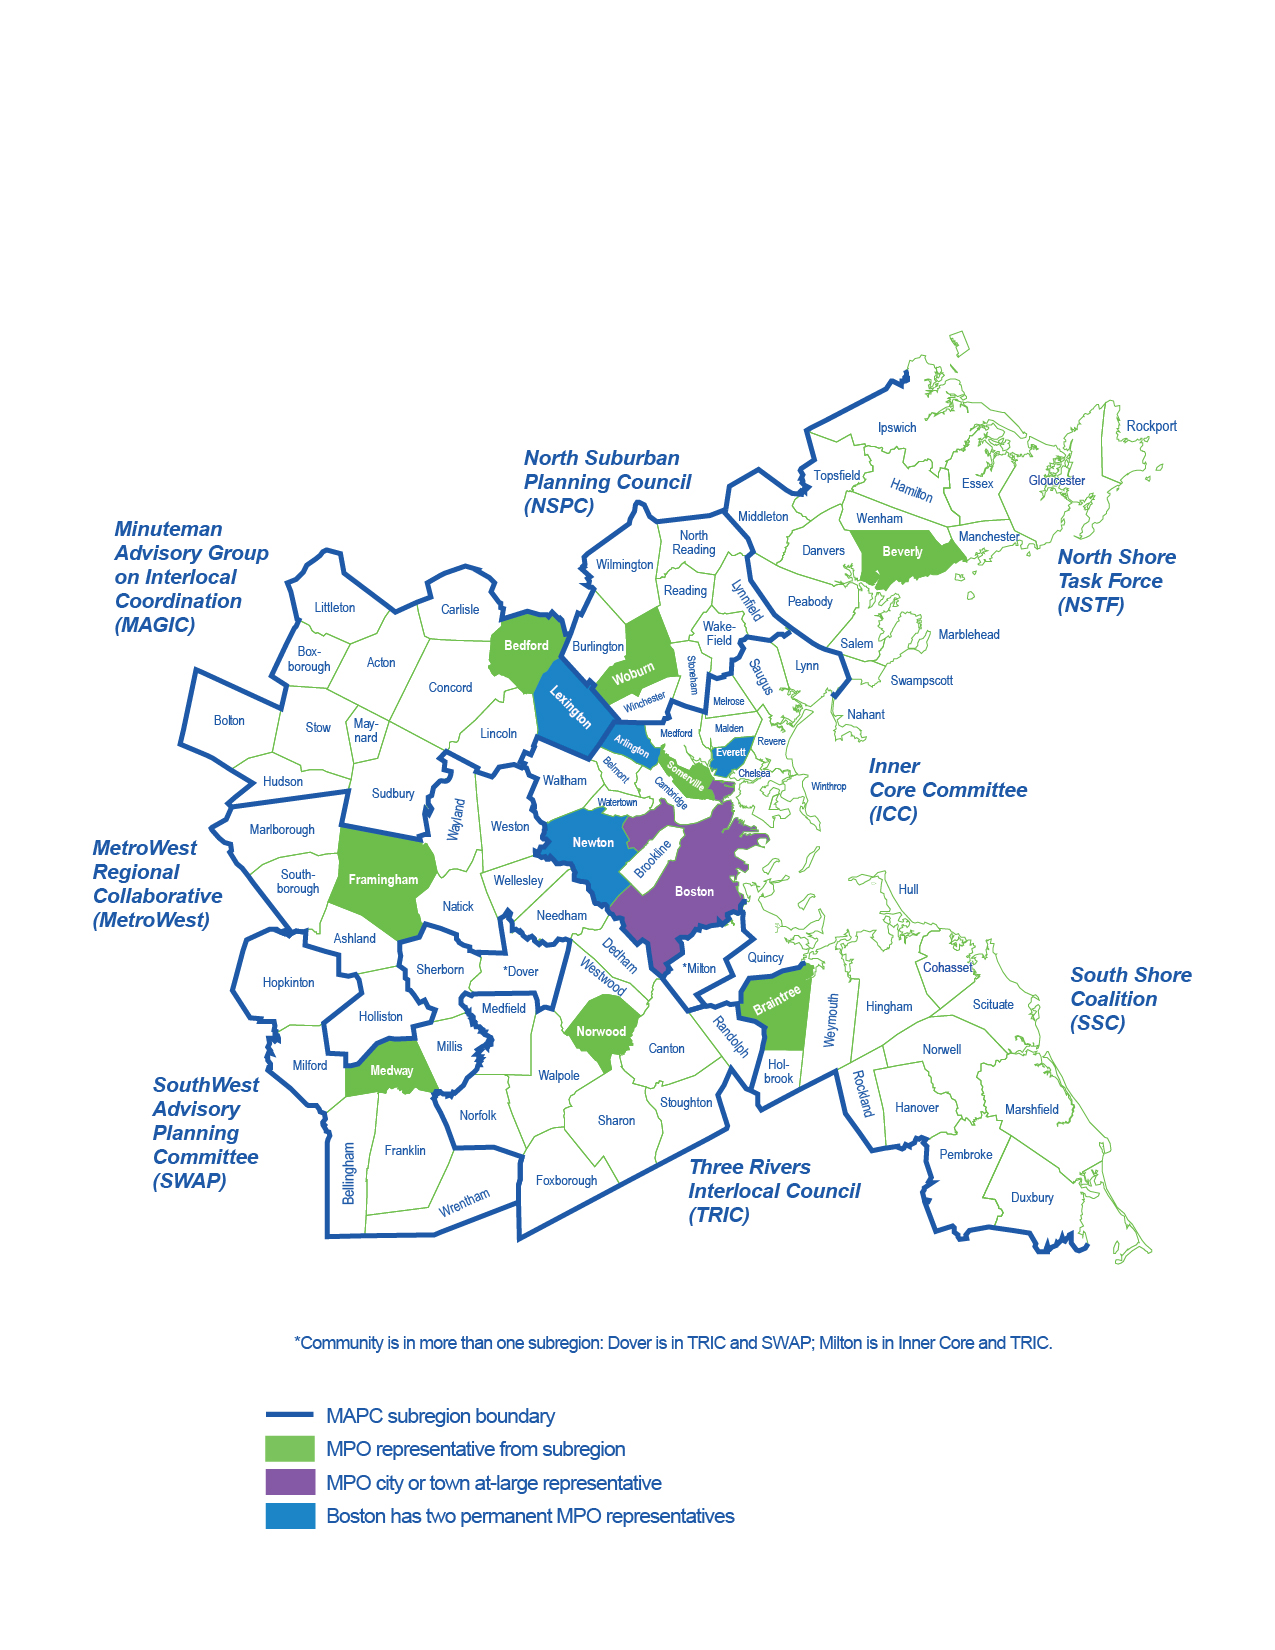 Figure 4 is a map outlining the Boston Region MPO area and MAPC subregions. The subregions are denoted by a thick blue outline, and consist of: North Suburban Planning Council, North Shore Task Force, Inner Core Committee, South Shore Coalition, Three Rivers Interlocal Council, SouthWest Advisory Planning Committee, MetroWest Regional Collaborative, and Minuteman Advisory Group on Interlocal Coordination. The community in each subregion that currently has a seat on the MPO is highlighted in green. They include Woburn for the North Suburban Planning Council; Beverly for the North Shore Task Force; Somerville for the Inner Core Committee; Braintree for the South Shore Coalition; Norwood for the Three Rivers Interlocal Council; Medway for the SouthWest Advisory Planning Committee; Framingham for the MetroWest Regional Collaborative, and Bedford for Minuteman Advisory Group on Interlocal Coordination. The At-Large cities (Everett and Newton) and towns (Arlington and Lexington) that have seats on the MPO are highlighted in blue. The City of Boston, which has two permanent seats on the MPO, is highlighted in purple. 